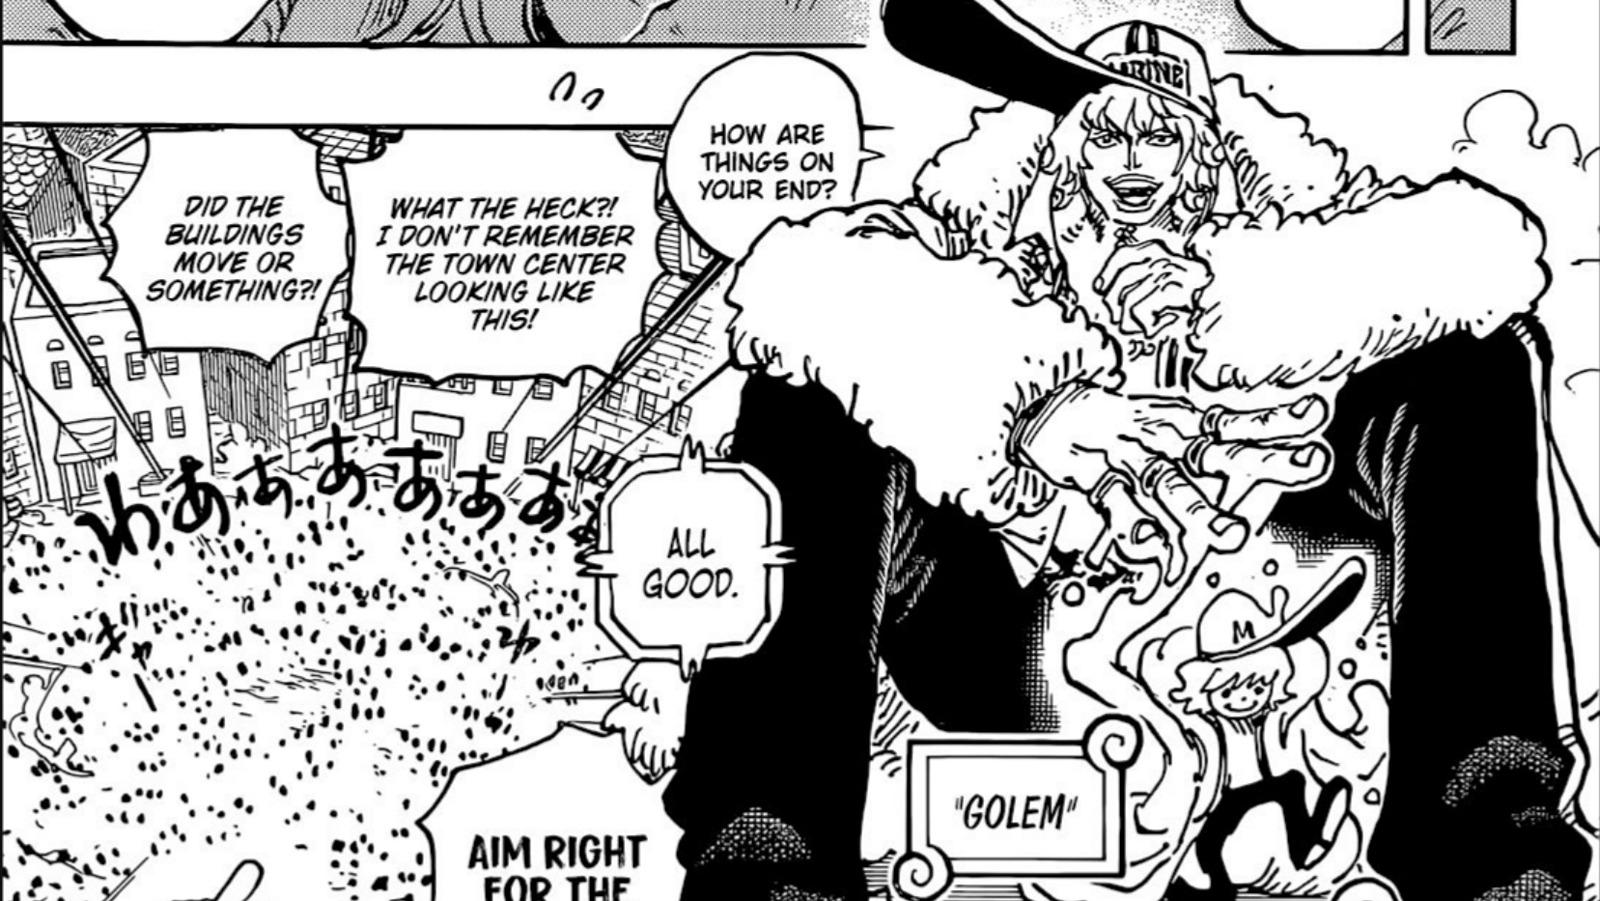 One Piece: Who is the SWORD member Prince Grus? - Dexerto